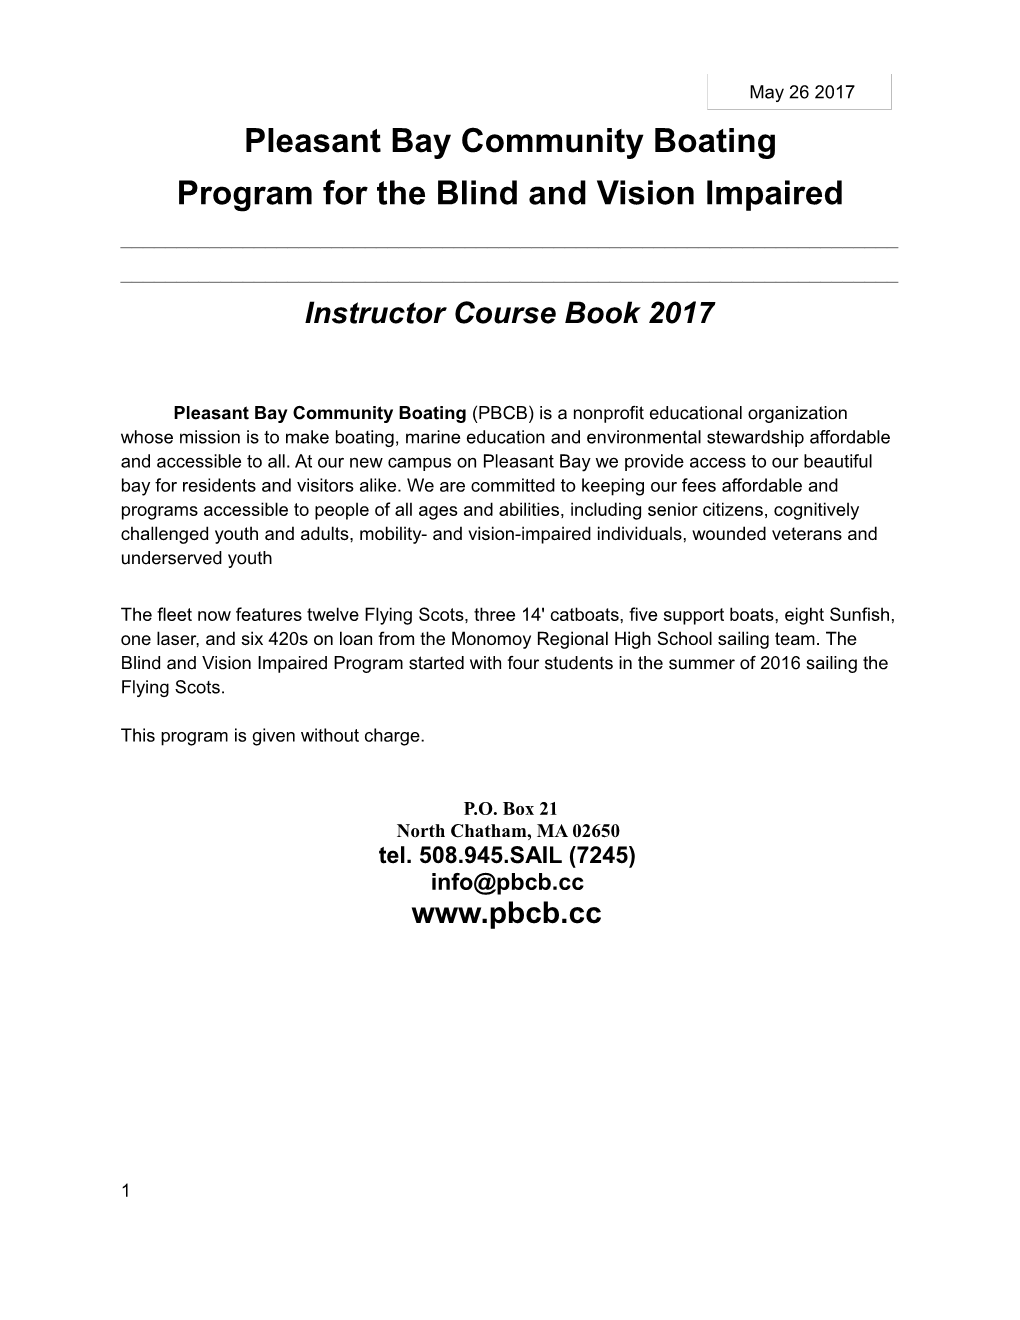 Pleasant Bay Community Boating Program for the Blind and Vision Impaired ______Instructor Course Book 2017